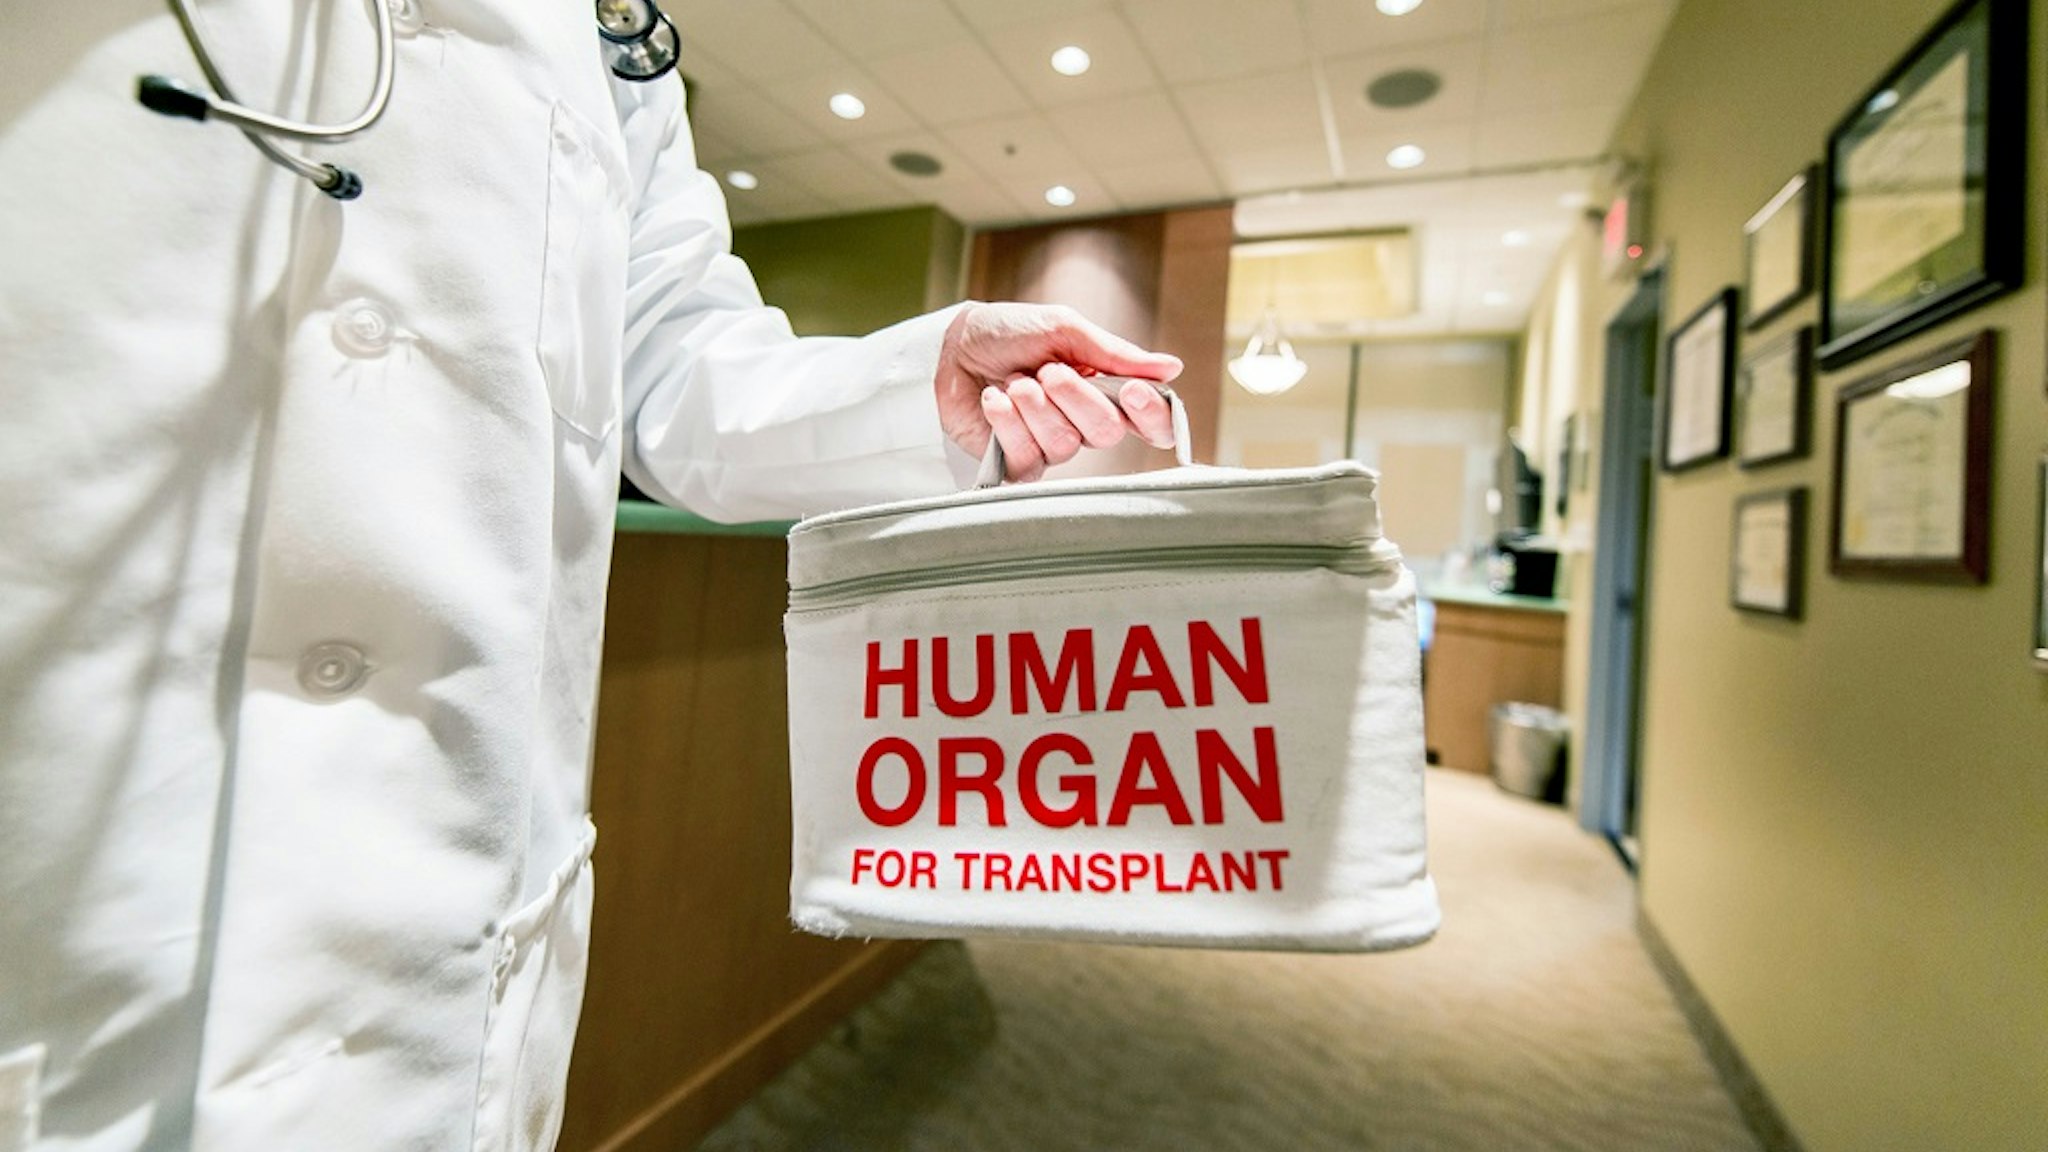 A doctor taking or delivering a bag containing a human organ for transplant.